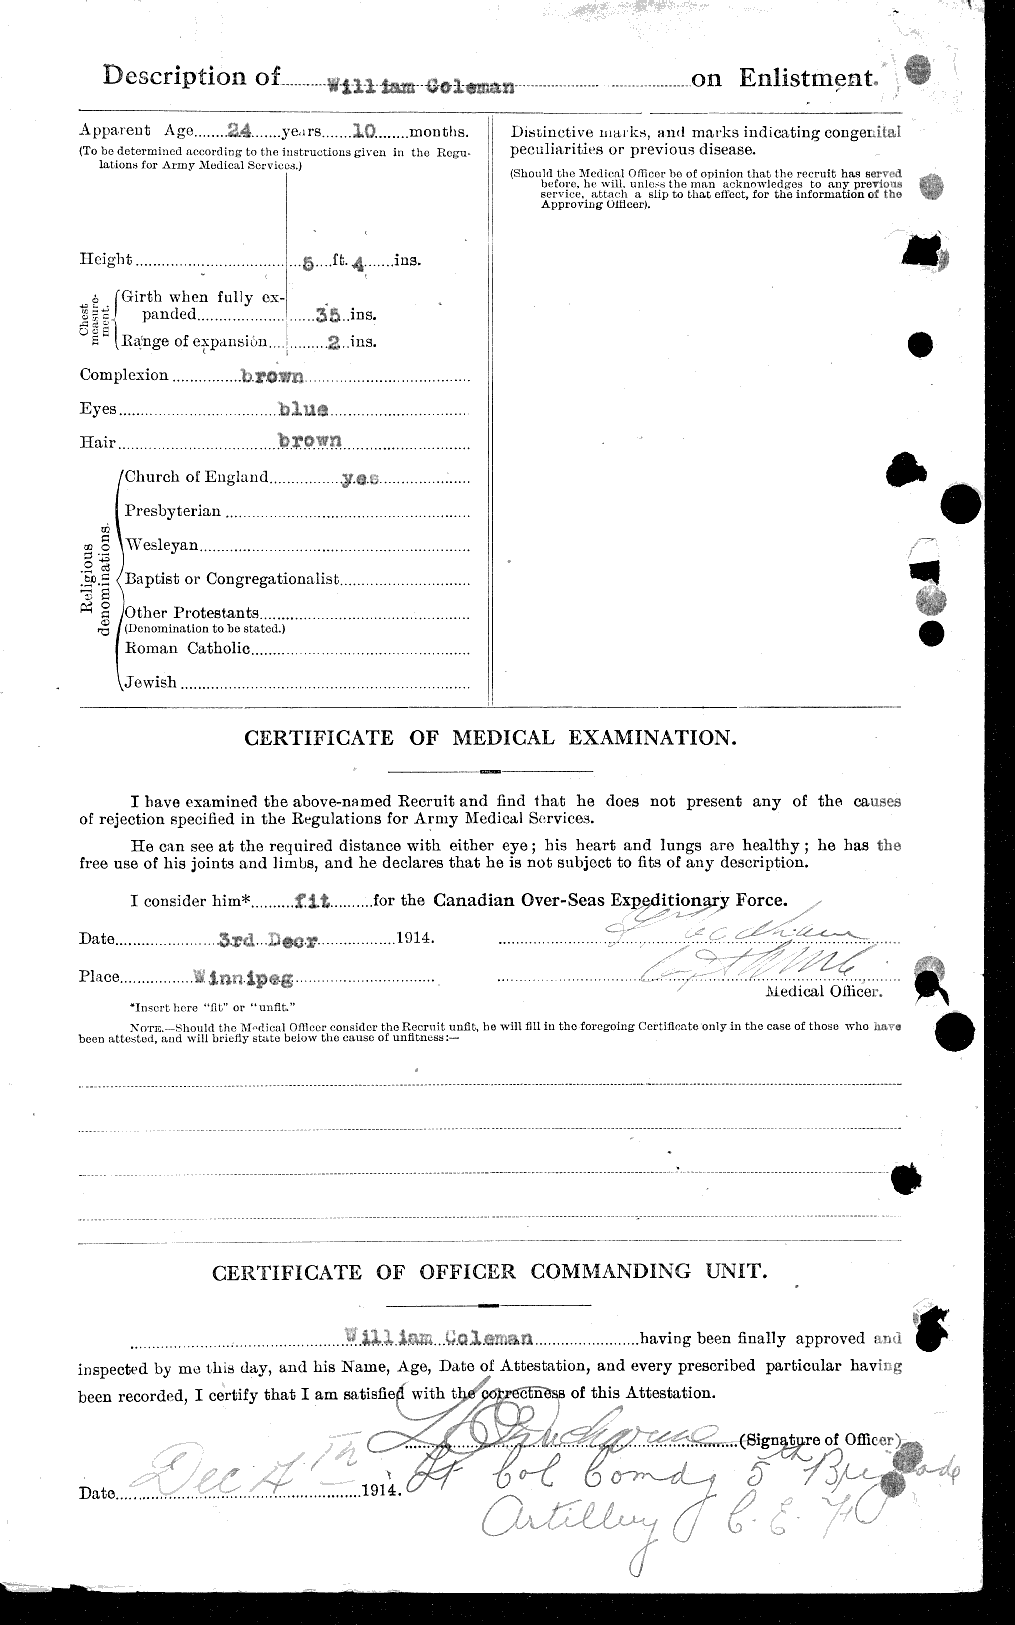 Personnel Records of the First World War - CEF 028294b